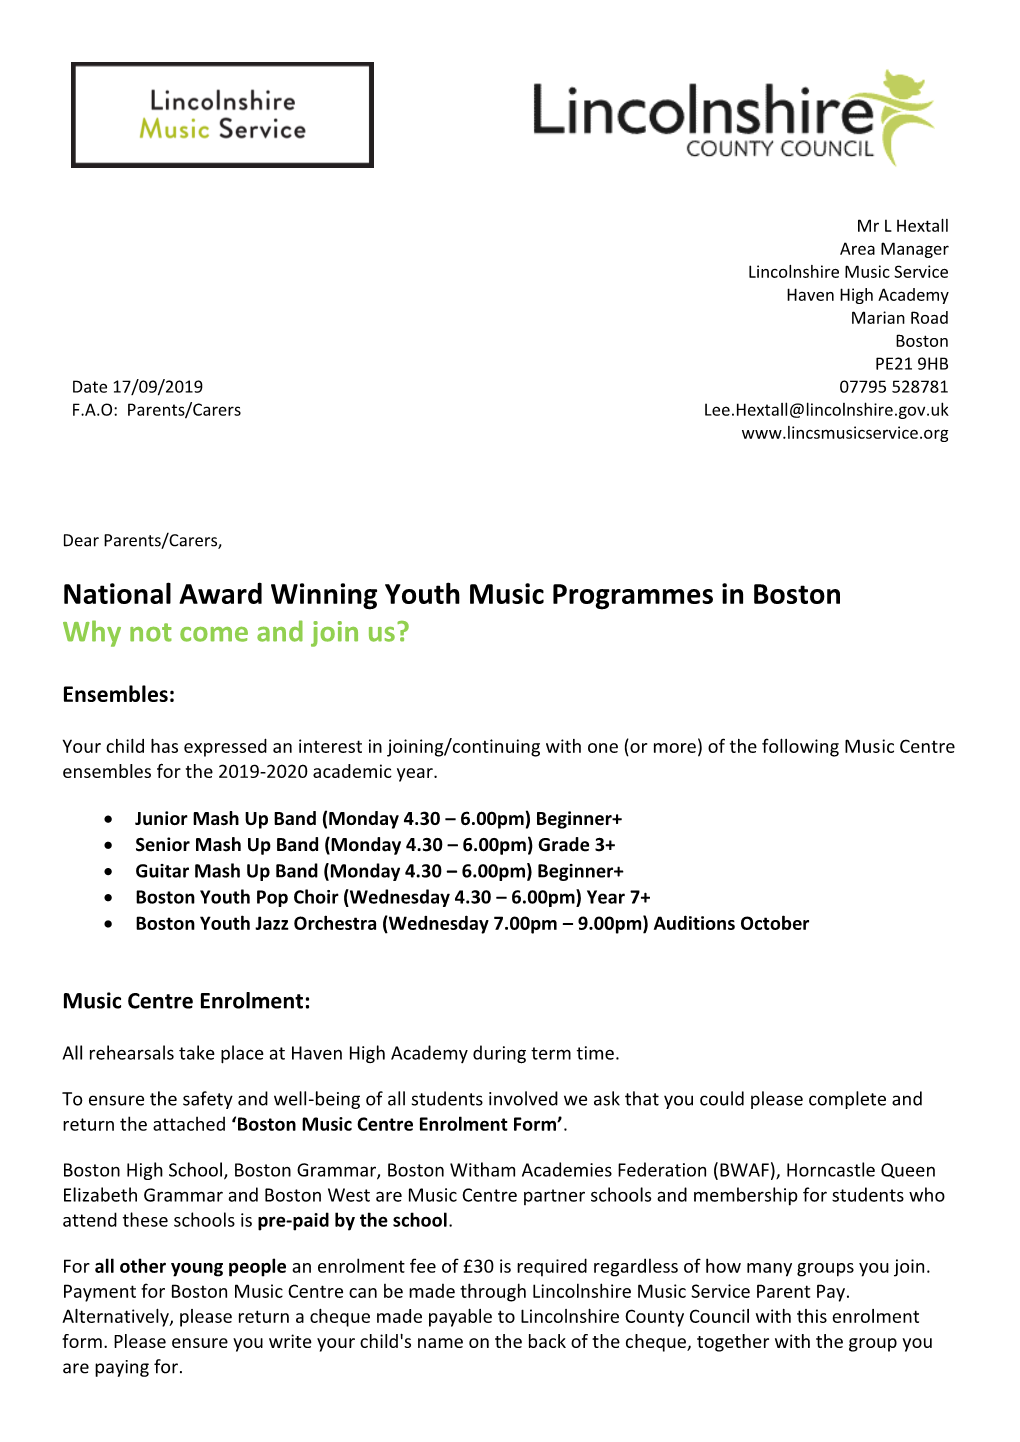 National Award Winning Youth Music Programmes in Boston Why Not Come and Join Us?